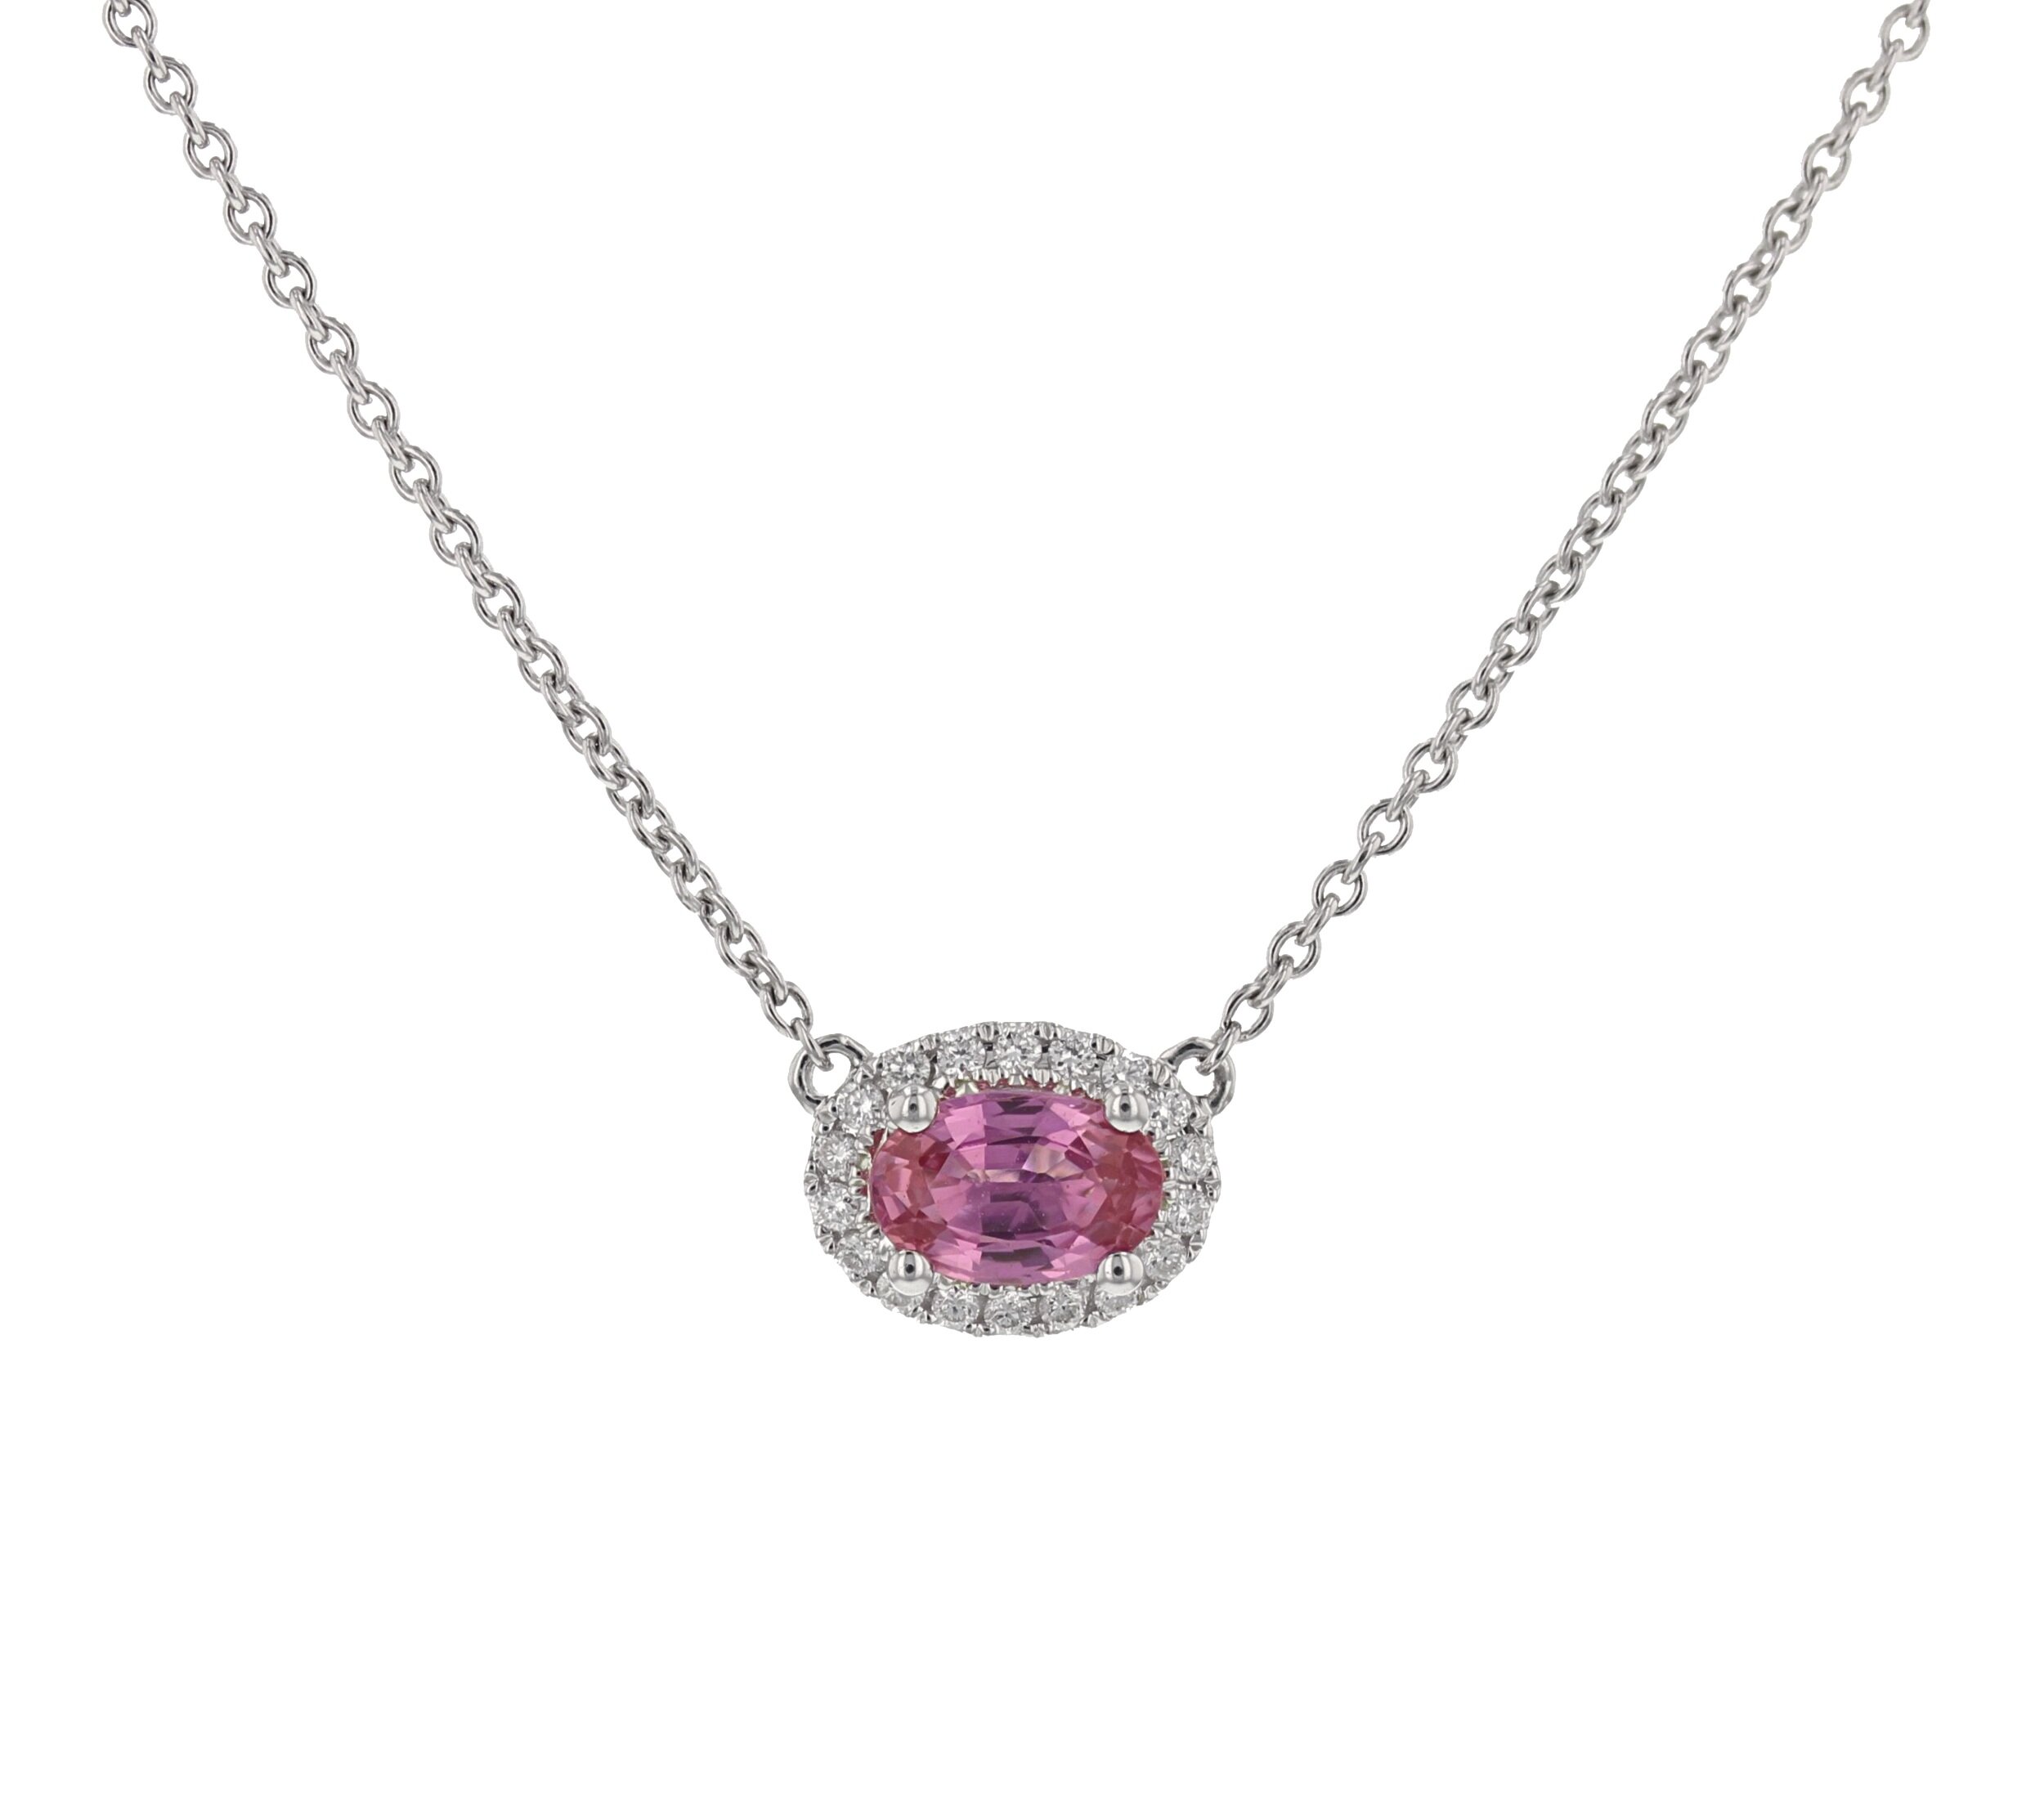 Pink Sapphire and Diamond Halo Pendant with 18K white gold adjustable chain. $1795